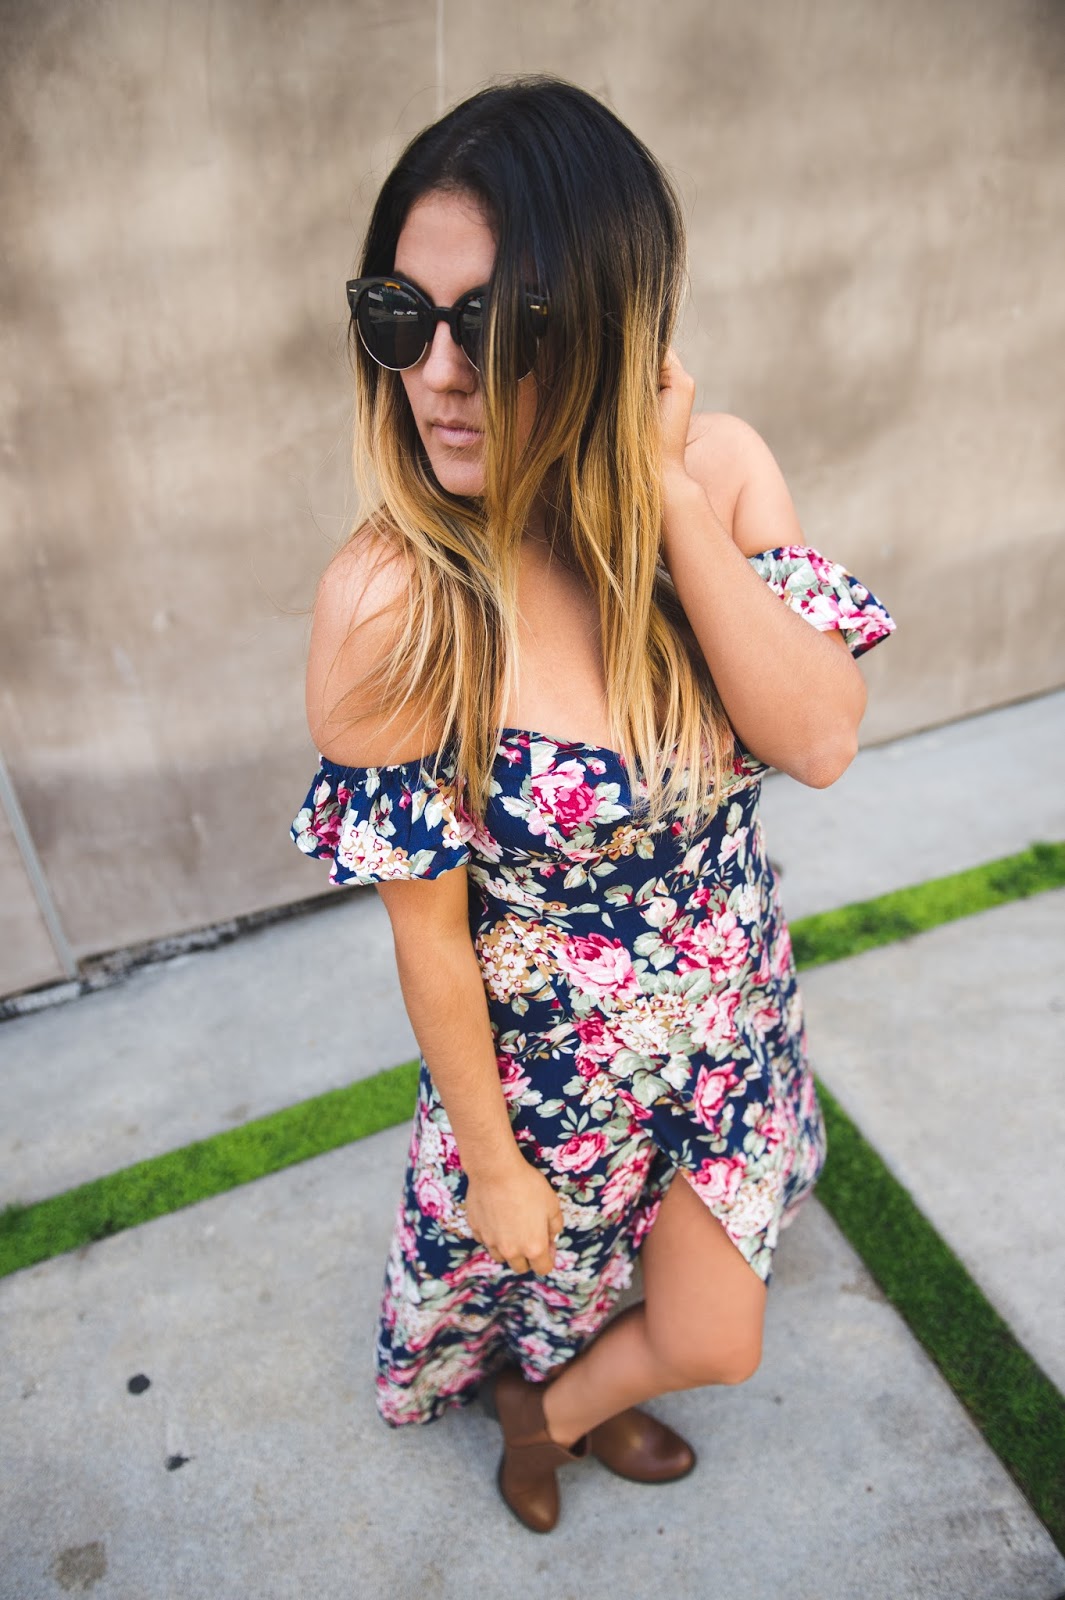 LA Style Blogger Taylor WInkelmeyer -- My Cup of Chic